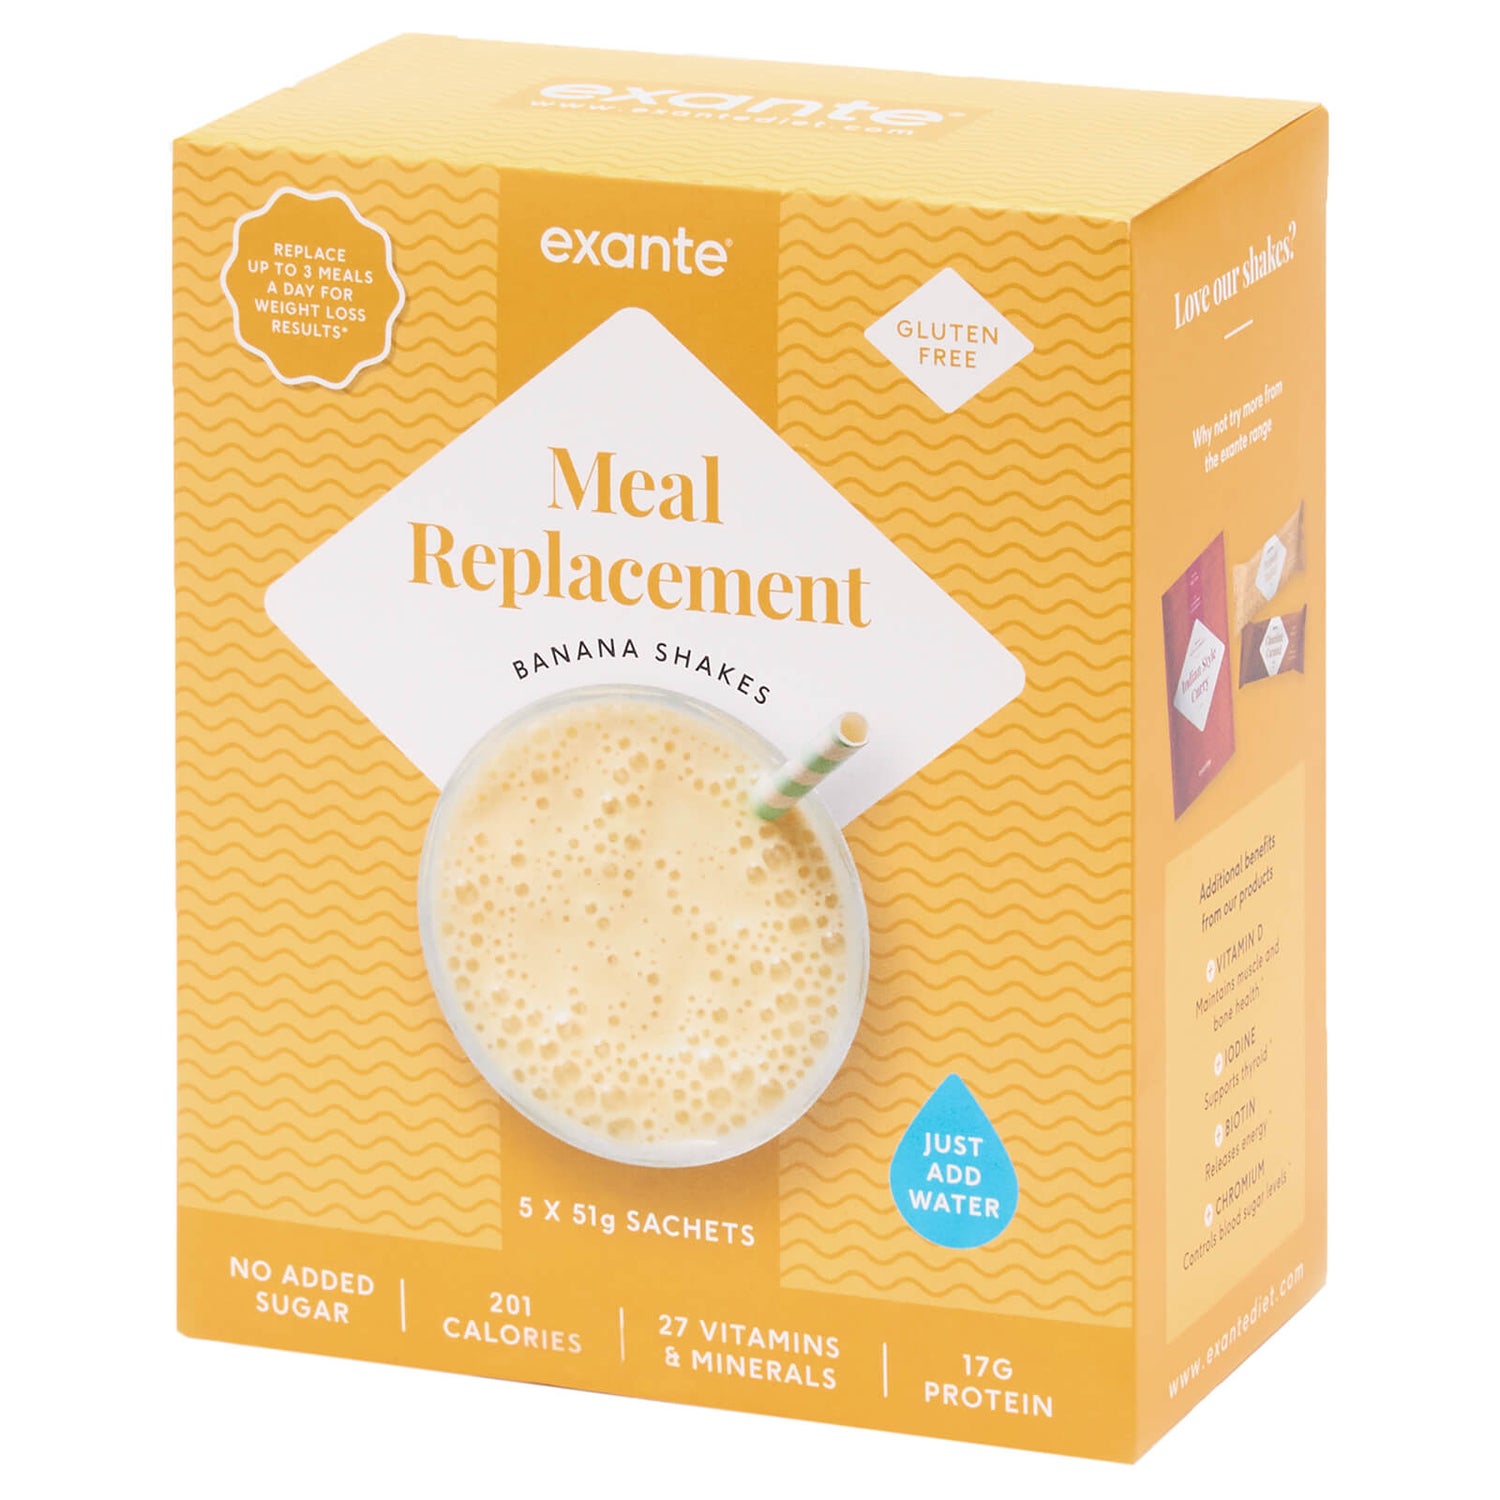 Meal Replacement Banana Shake, Pack of 5